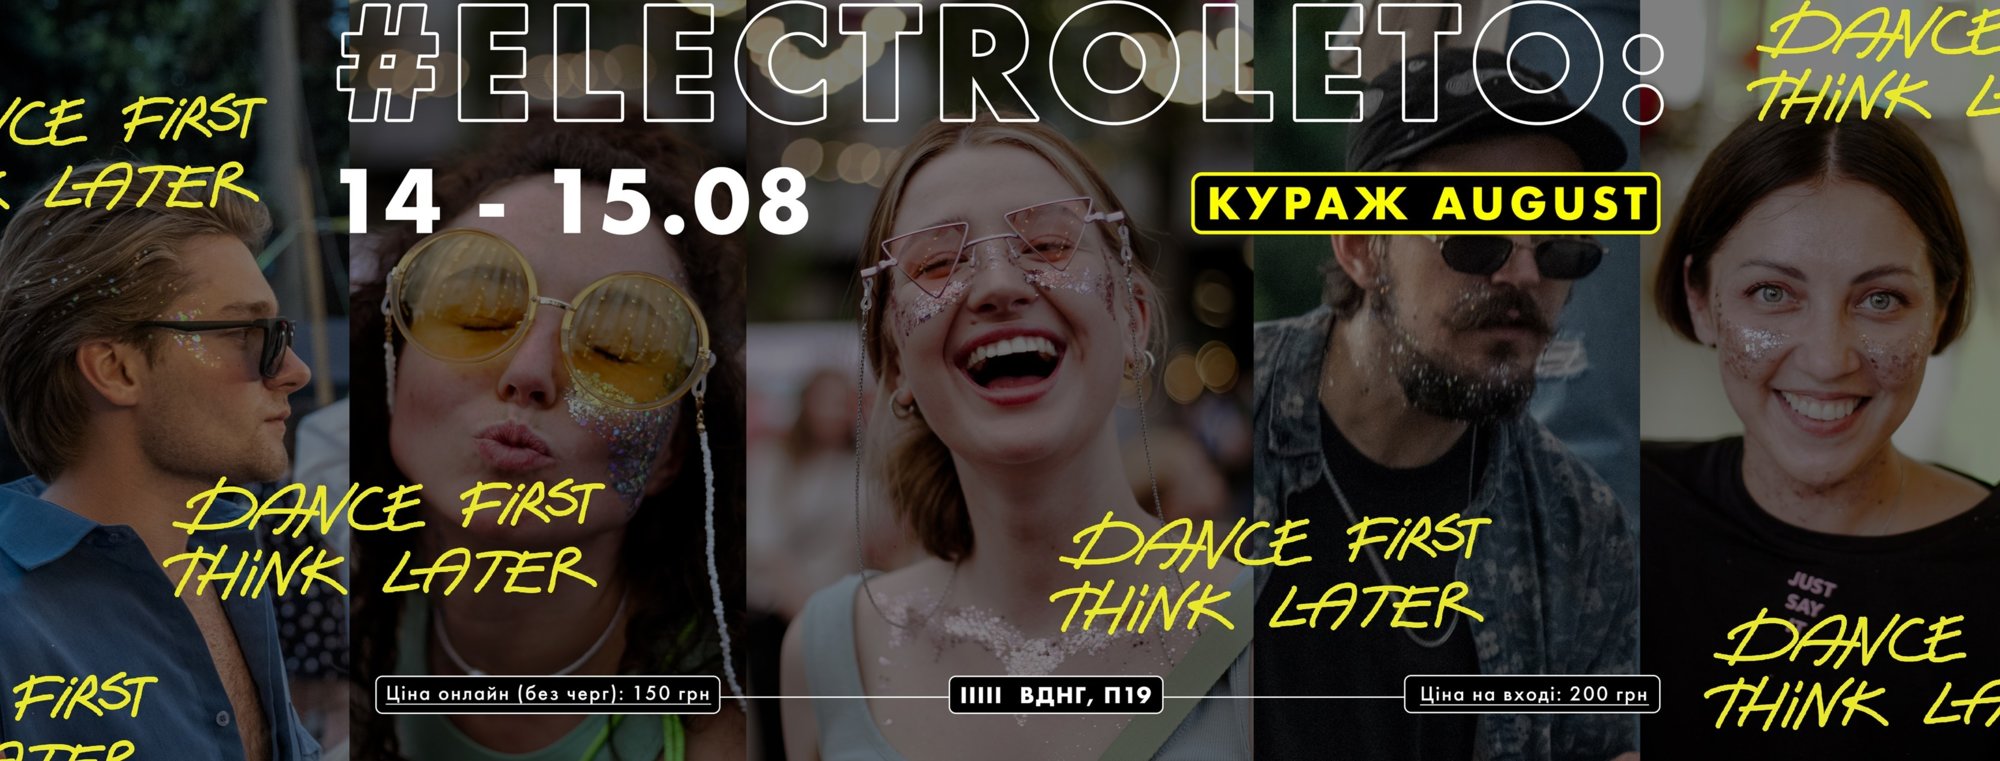 Electroleto: Кураж August